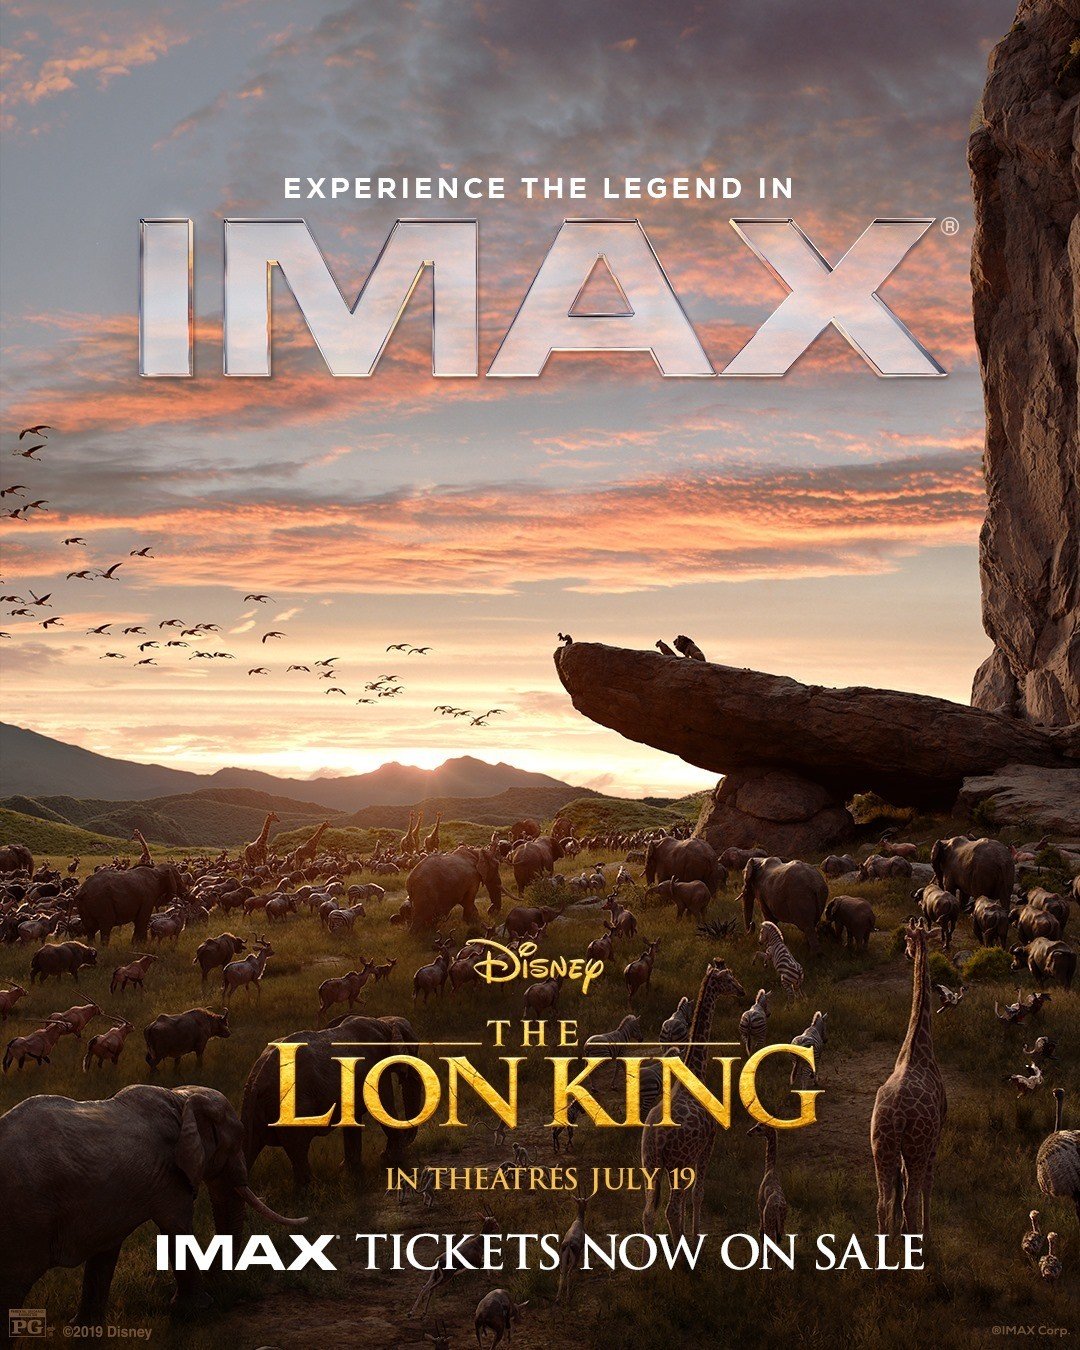 download the making of lion king 2019